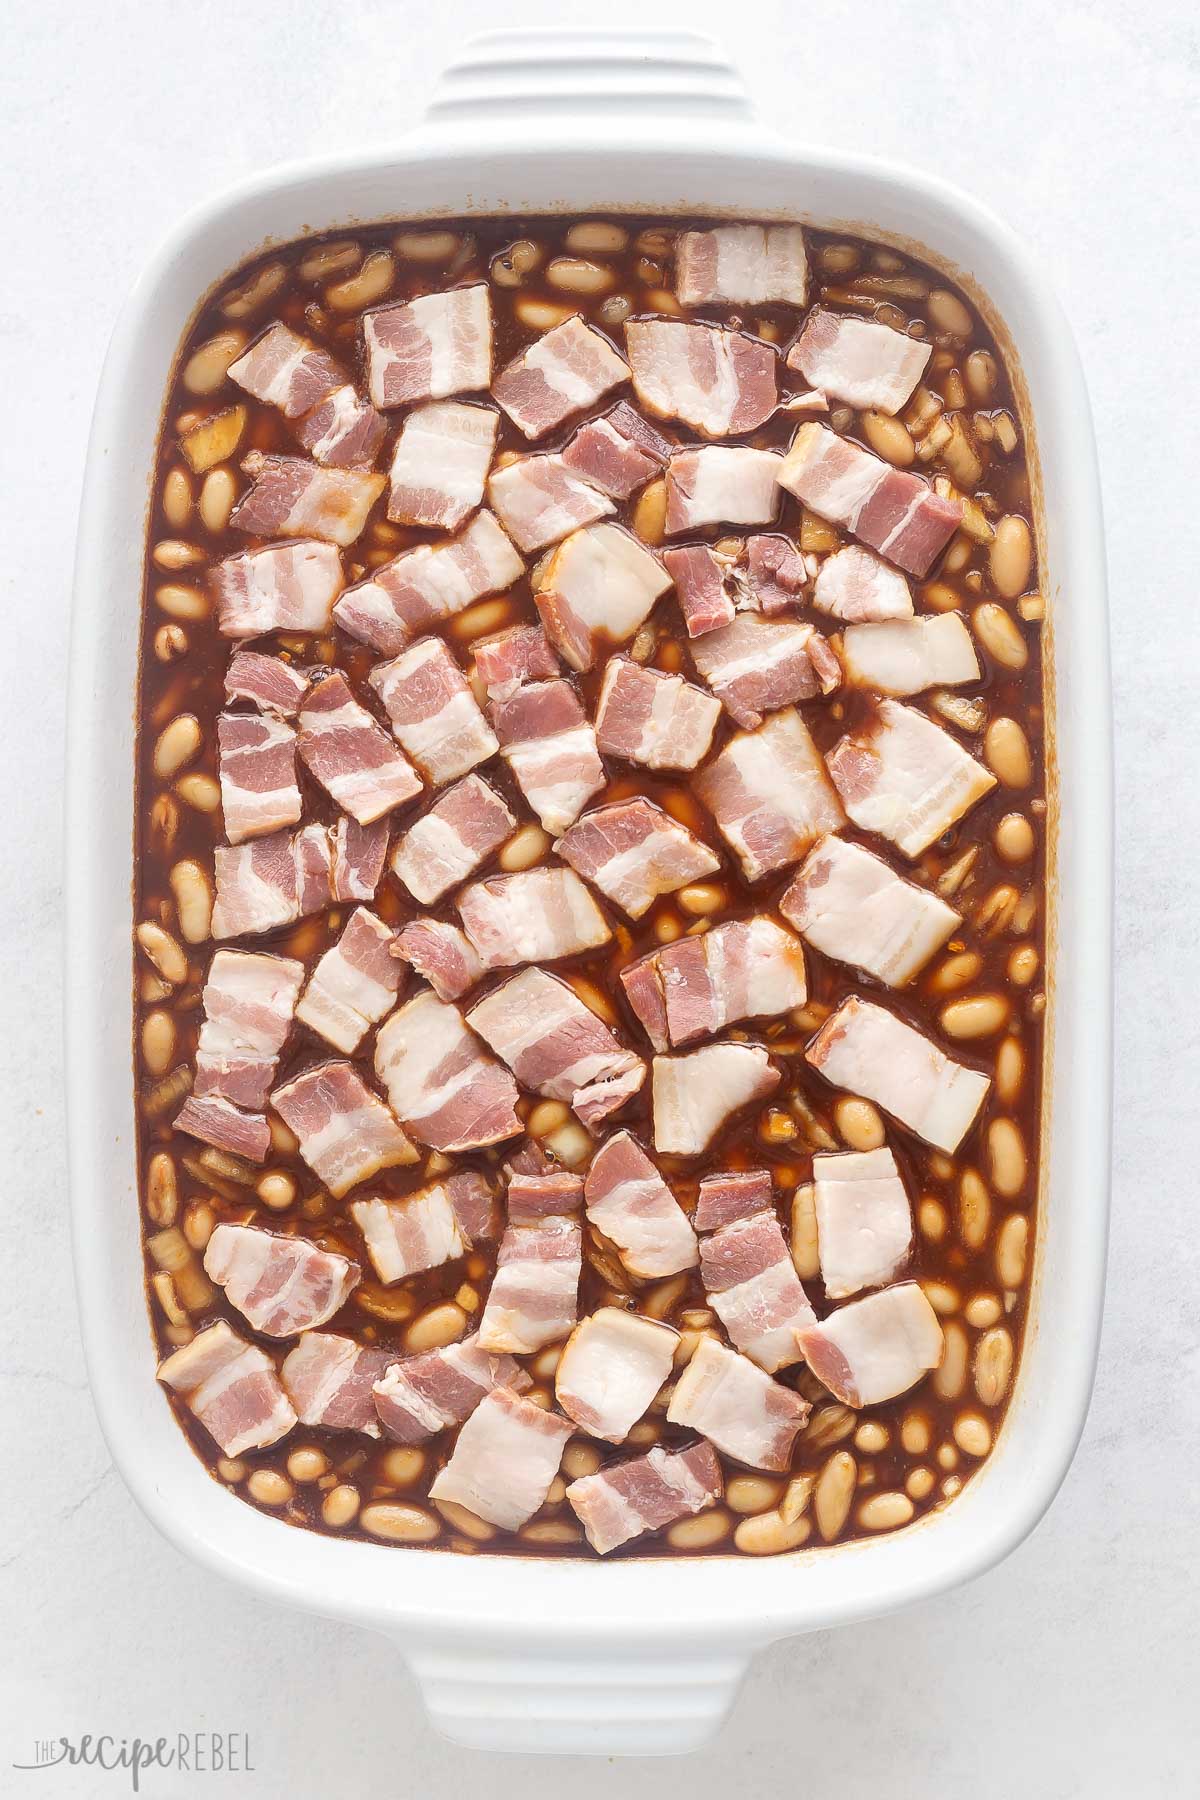 raw pieces of bacon on top of beans in baking dish.